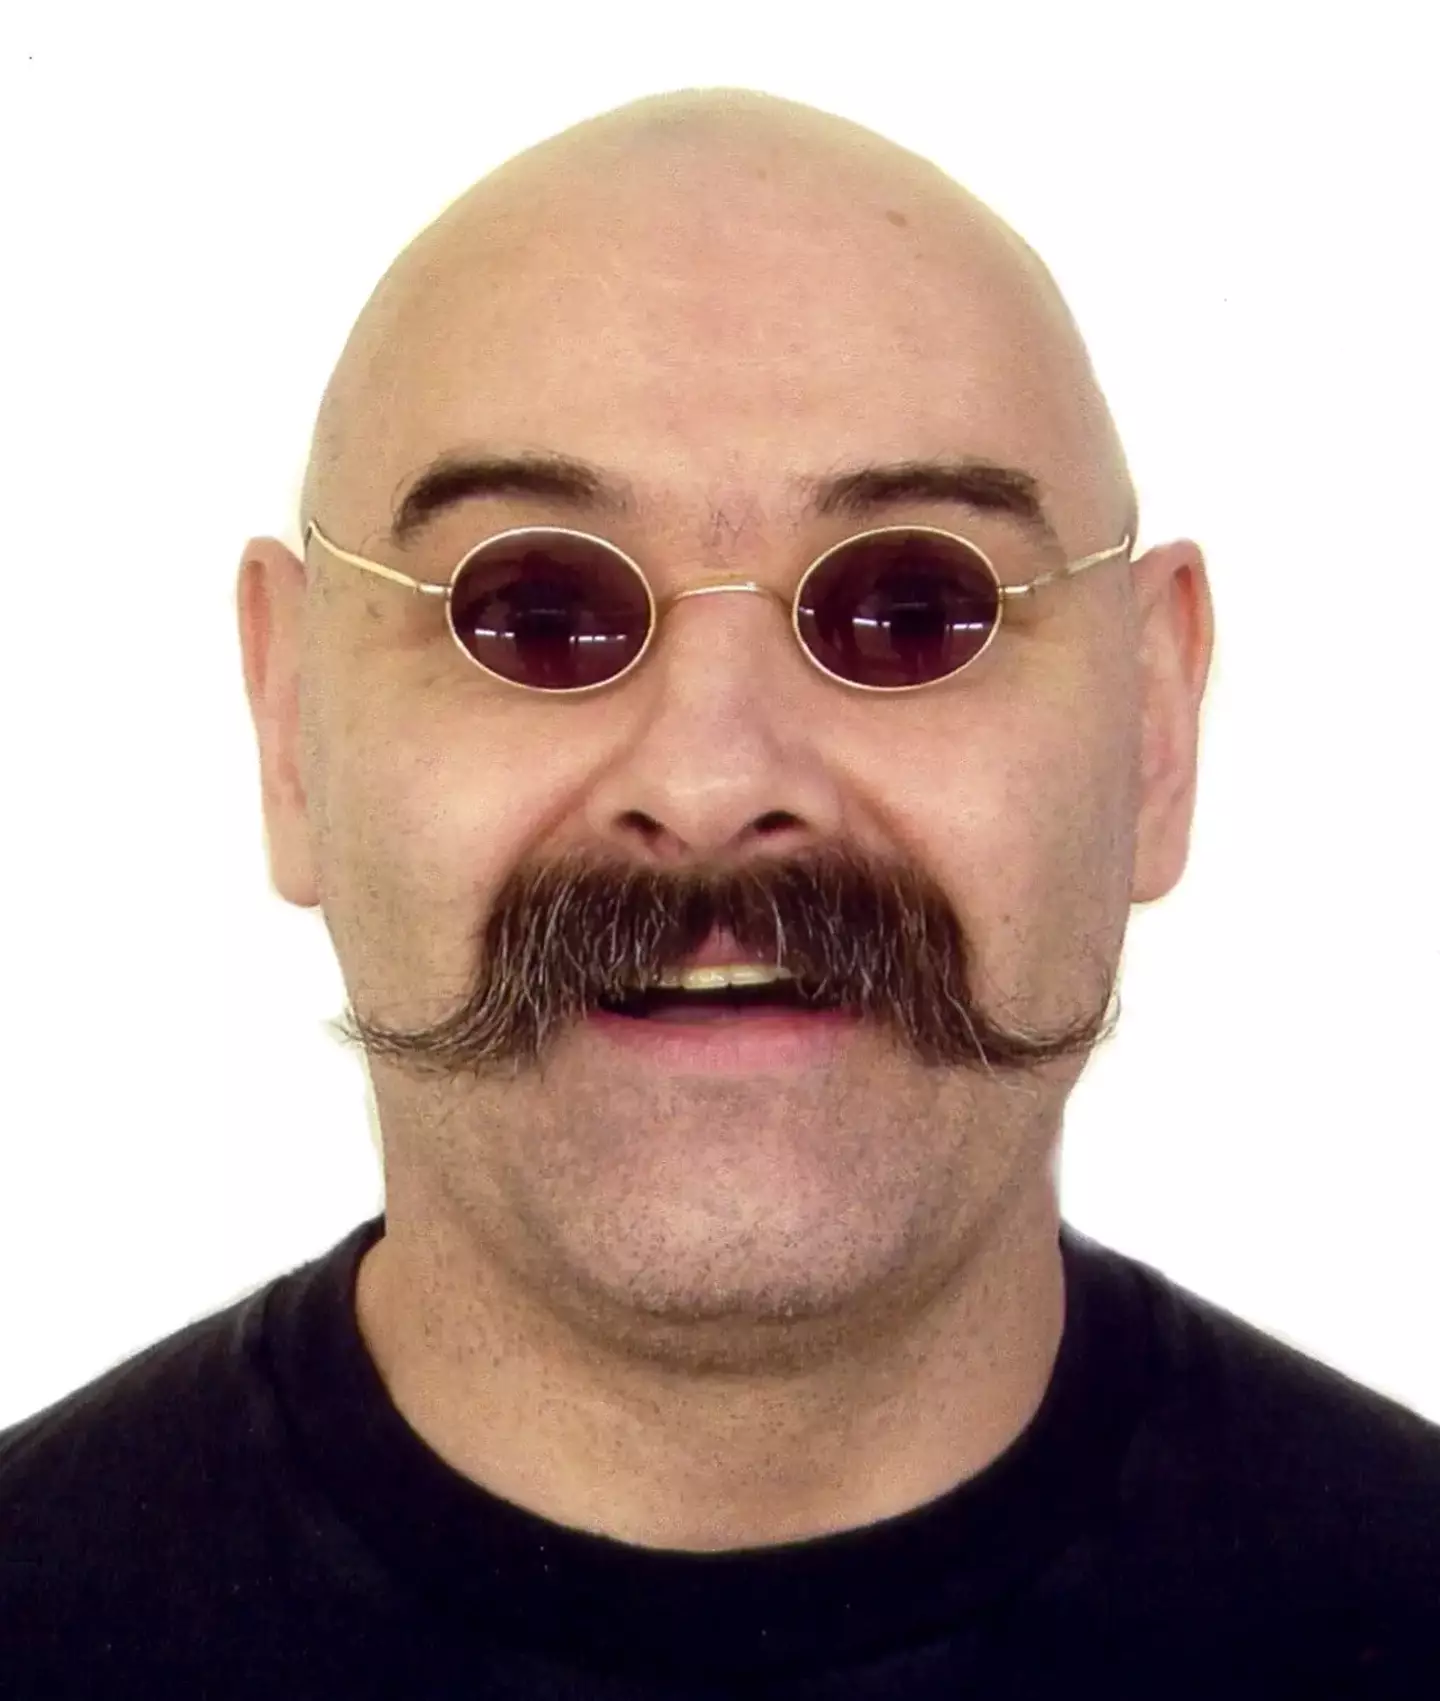 Charles Bronson can be heard leaving a voicemail on a podcaster’s phone in rare footage.